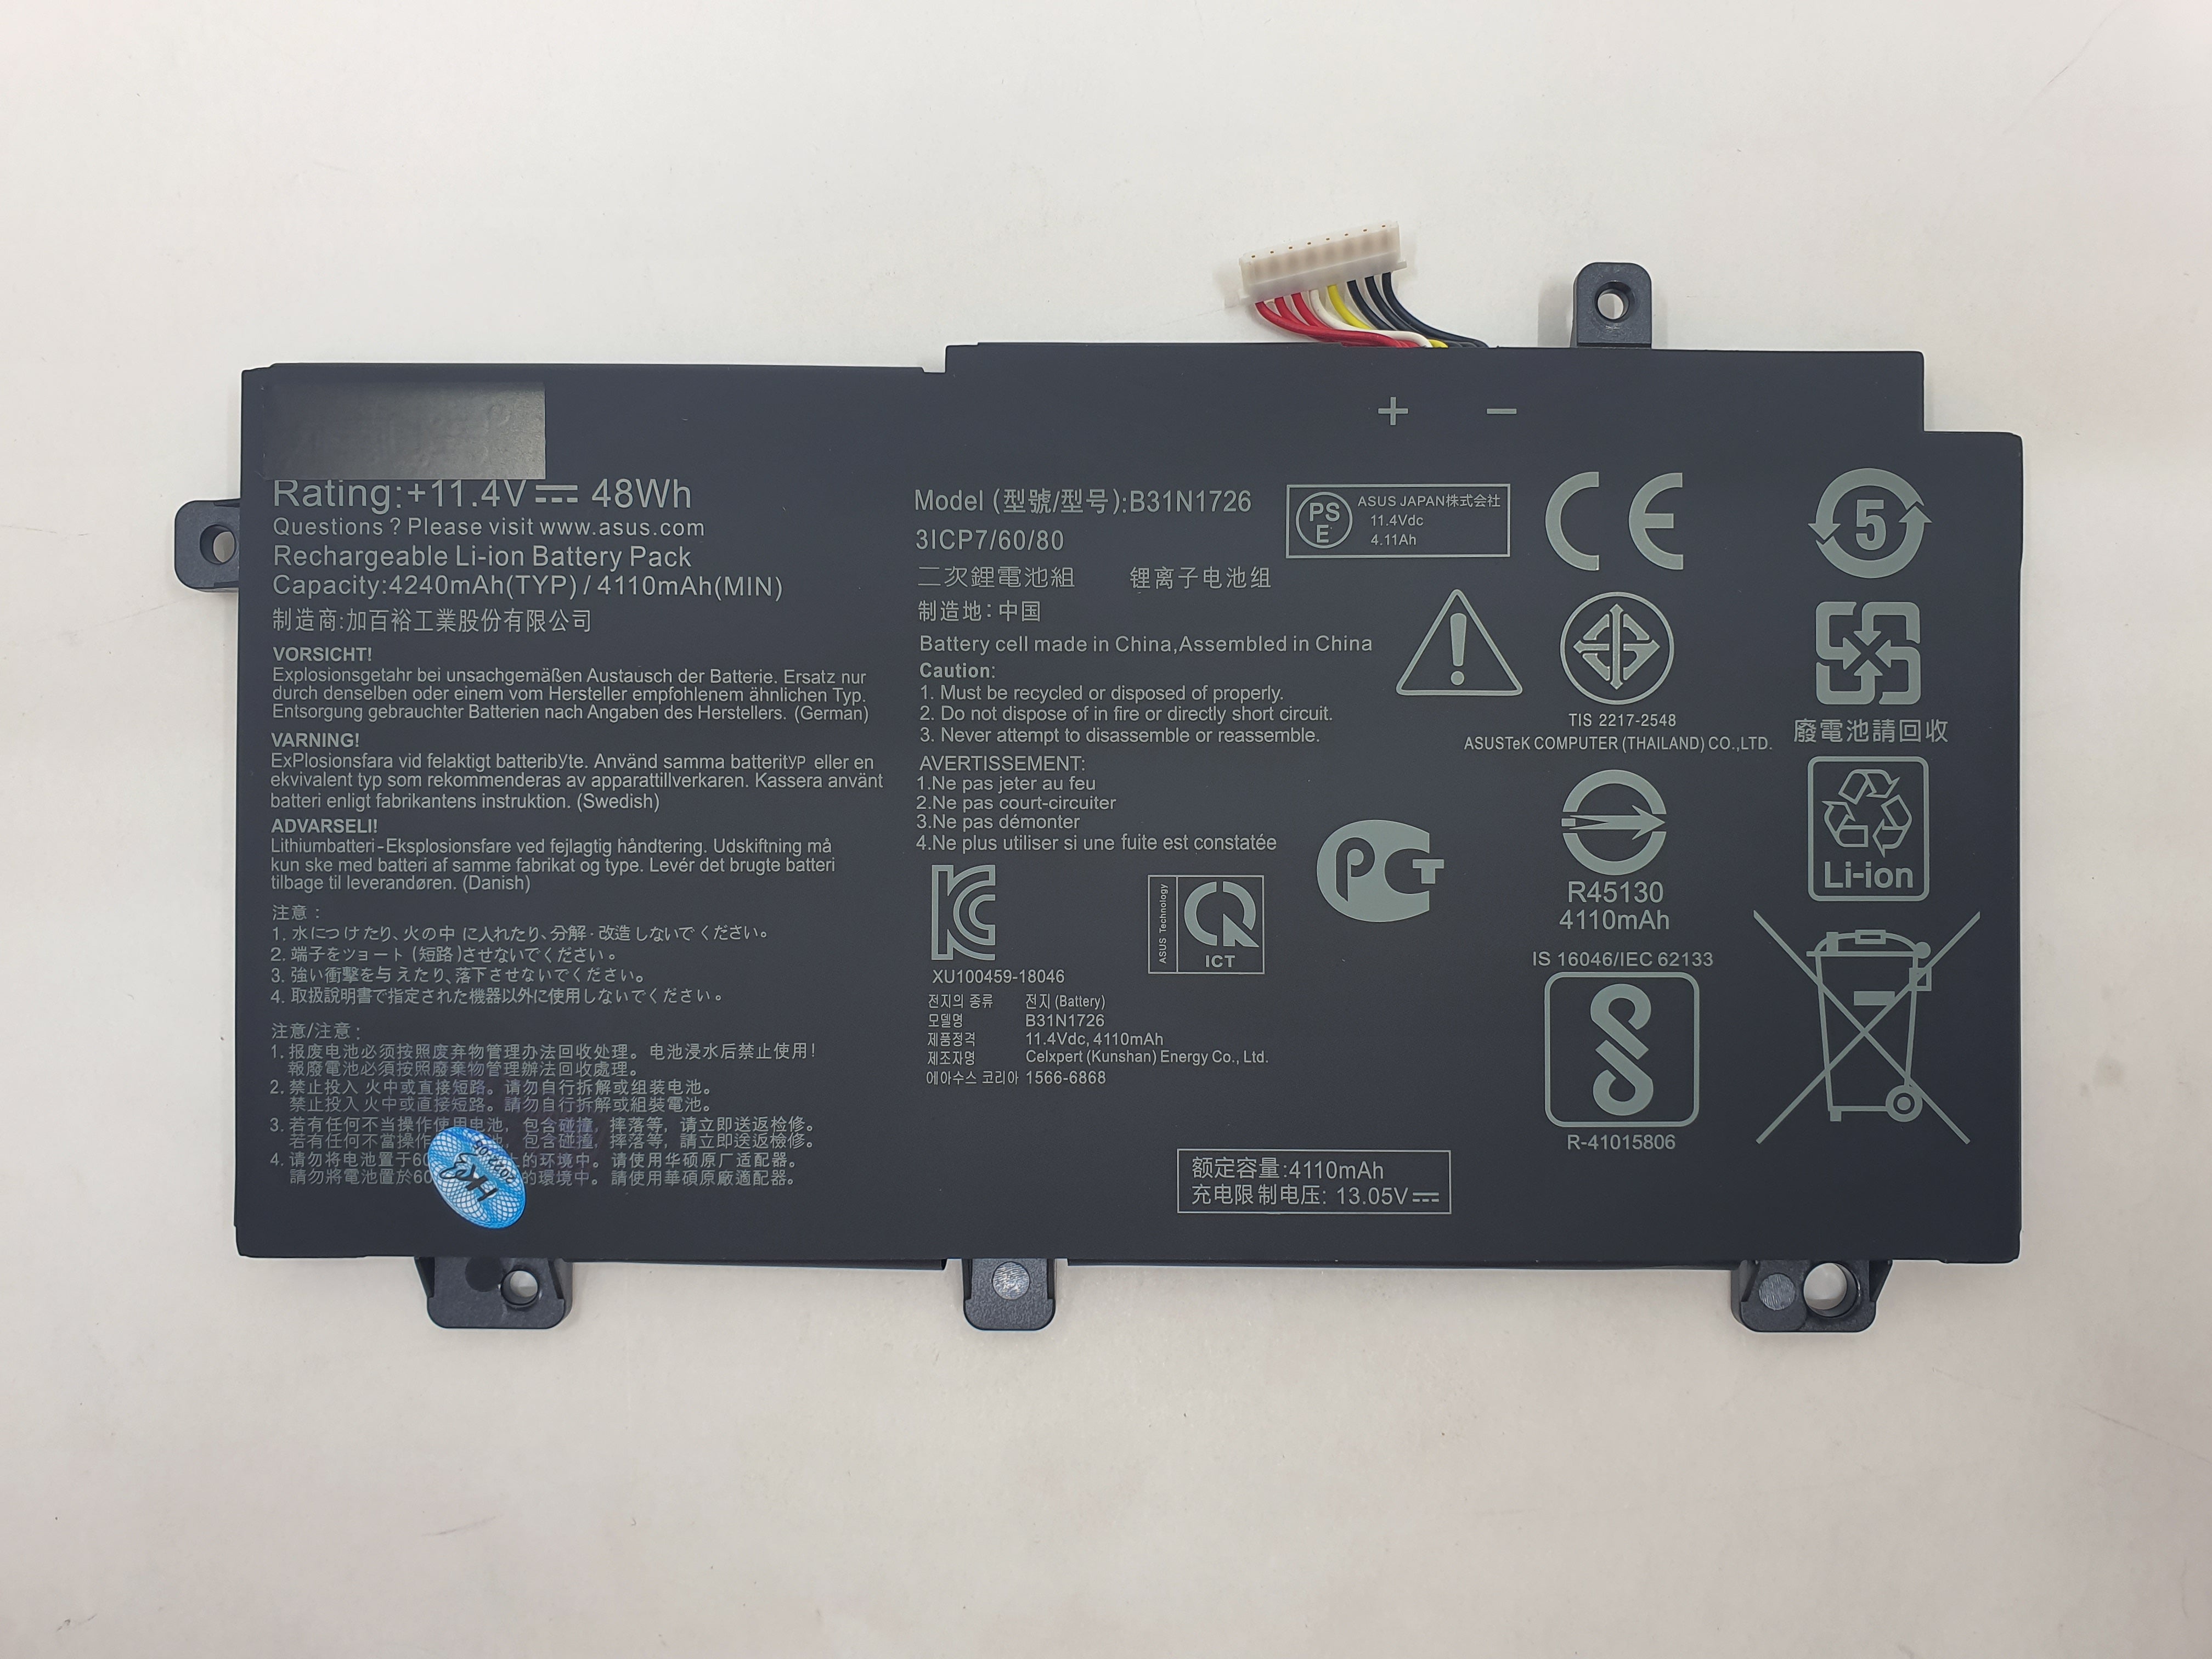 Asus Battery FX505DY A1 for Asus TUF Gaming FX505DY